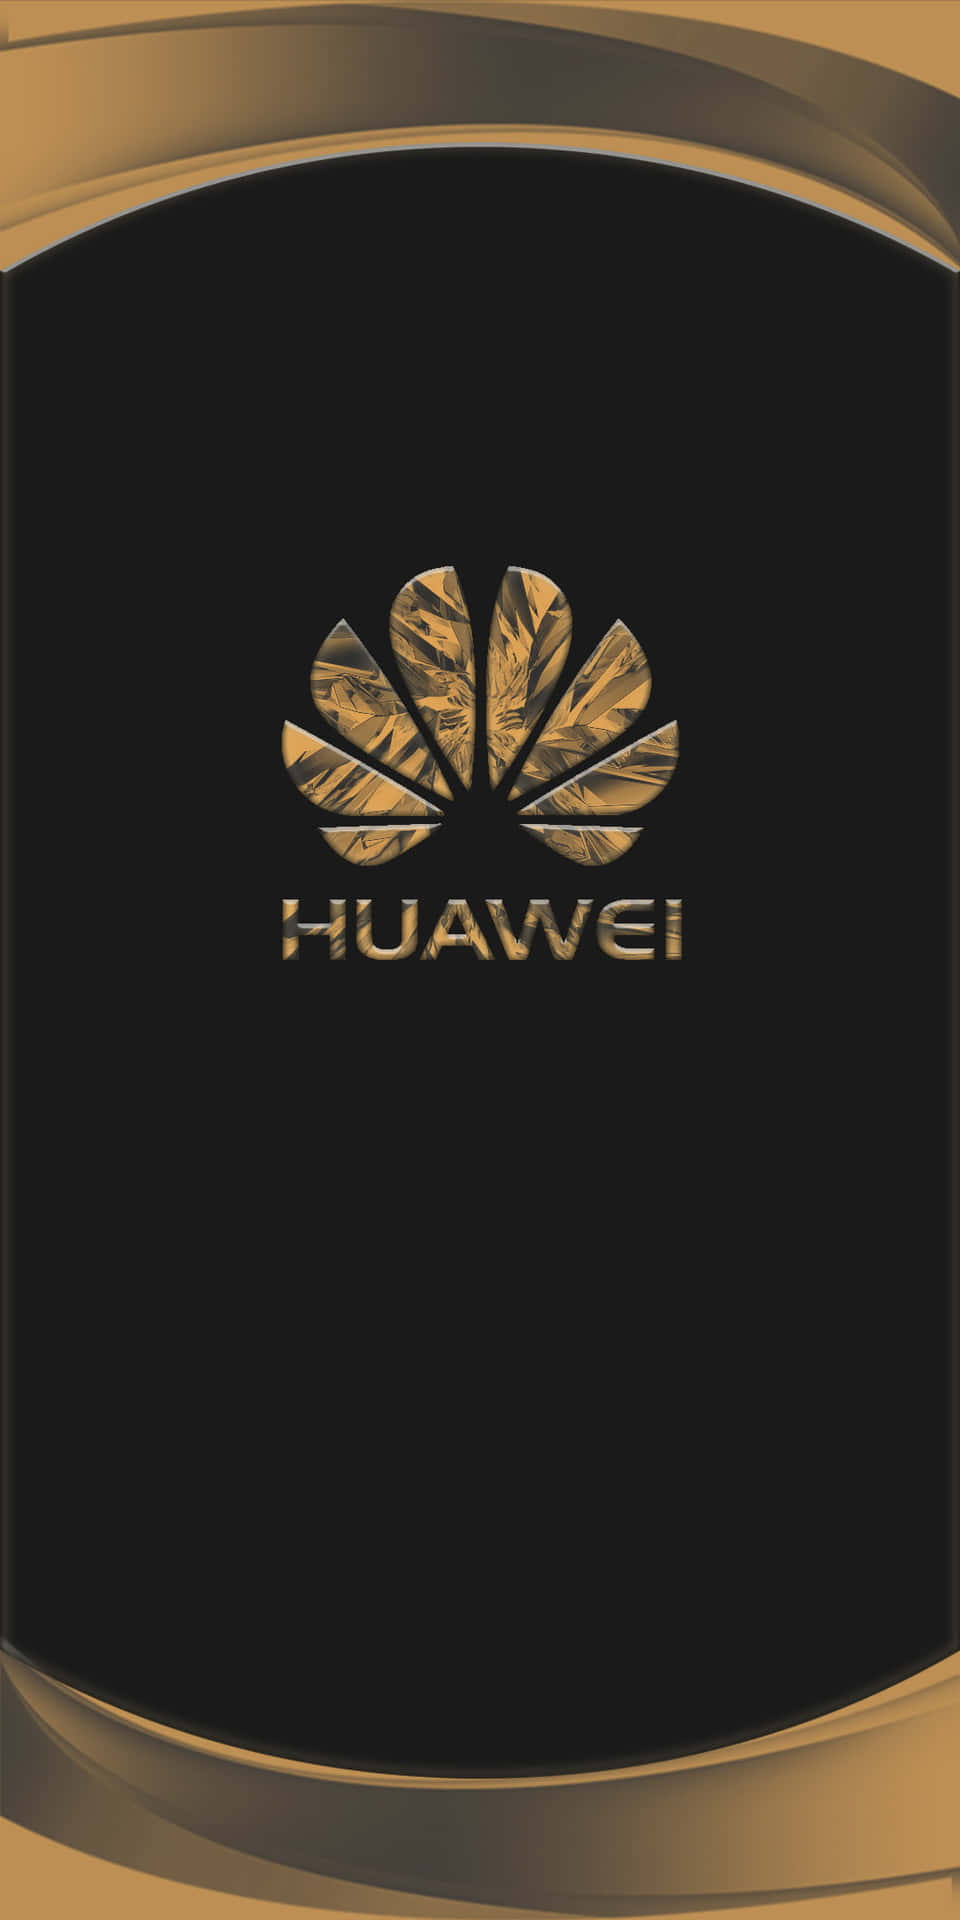 Get the best out of your everyday with a Huawei device